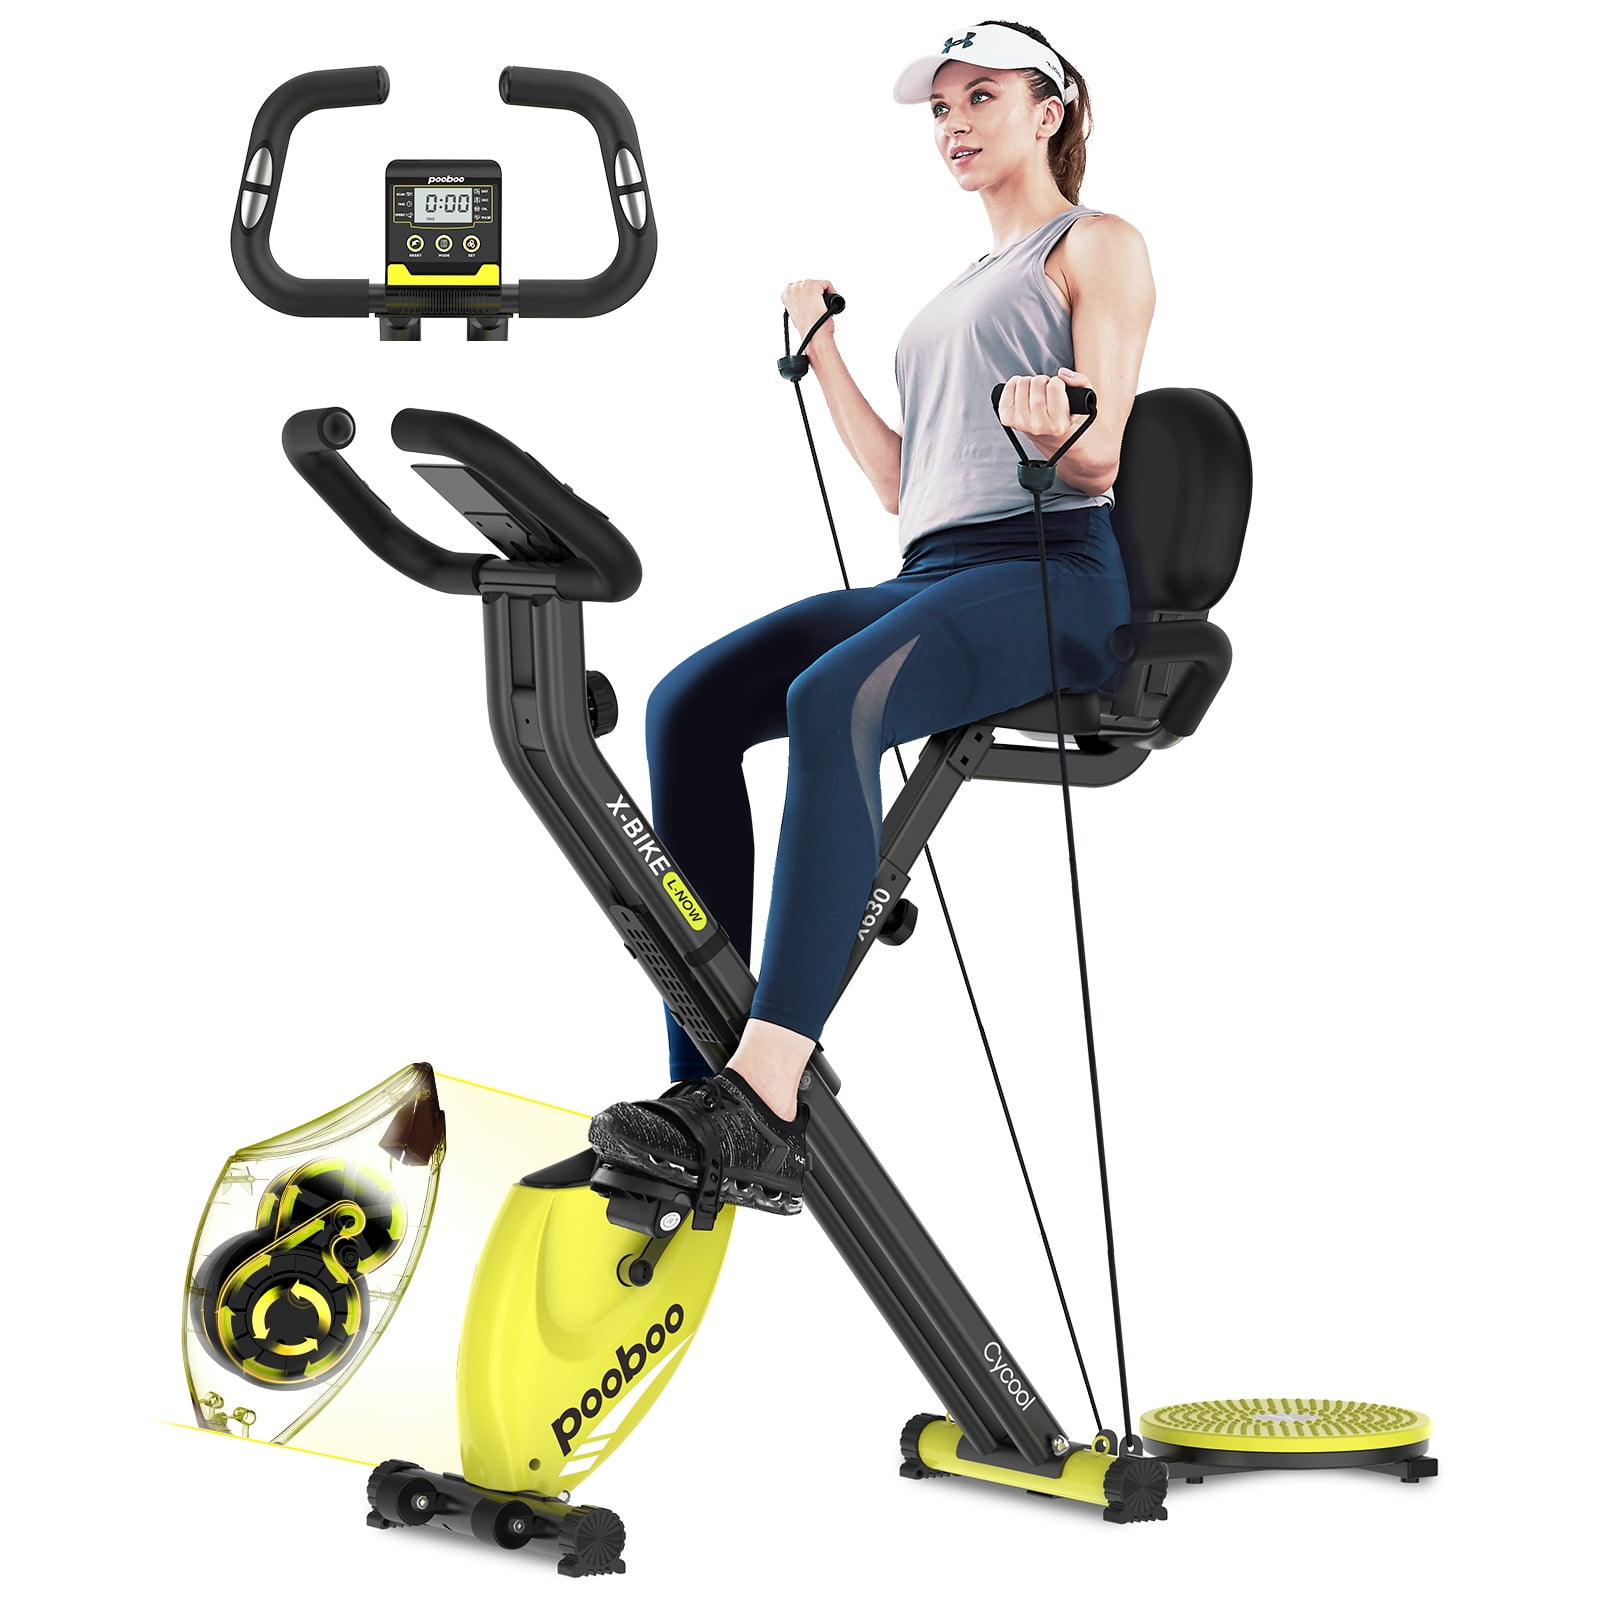 pooboo Exercise Bike Foldable 3 in 1 Indoor Cycling Bike Magnetic Stationary Bike X Bike with Twister Board and Arm Resistance Bands for Home Cardio Workout Training 